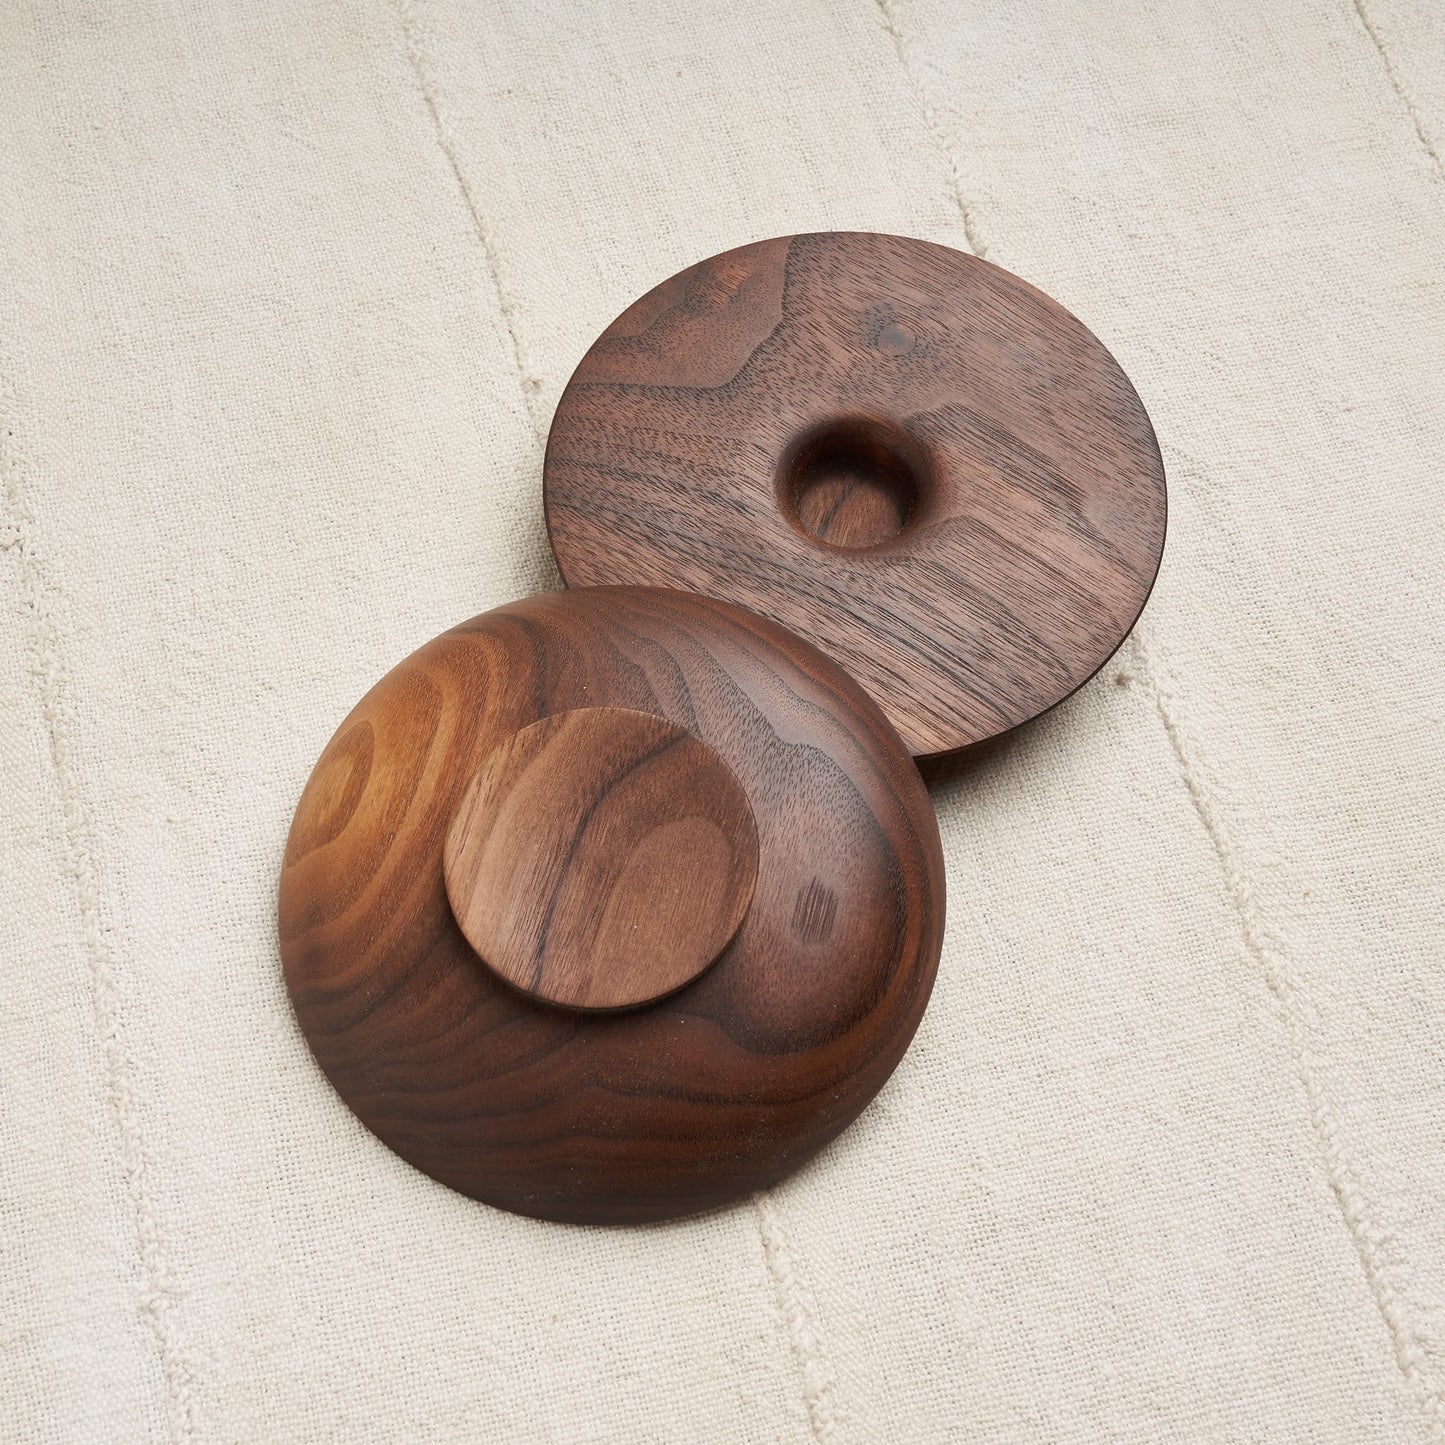 Hand-Turned Candlestick Holders, Natural Walnut